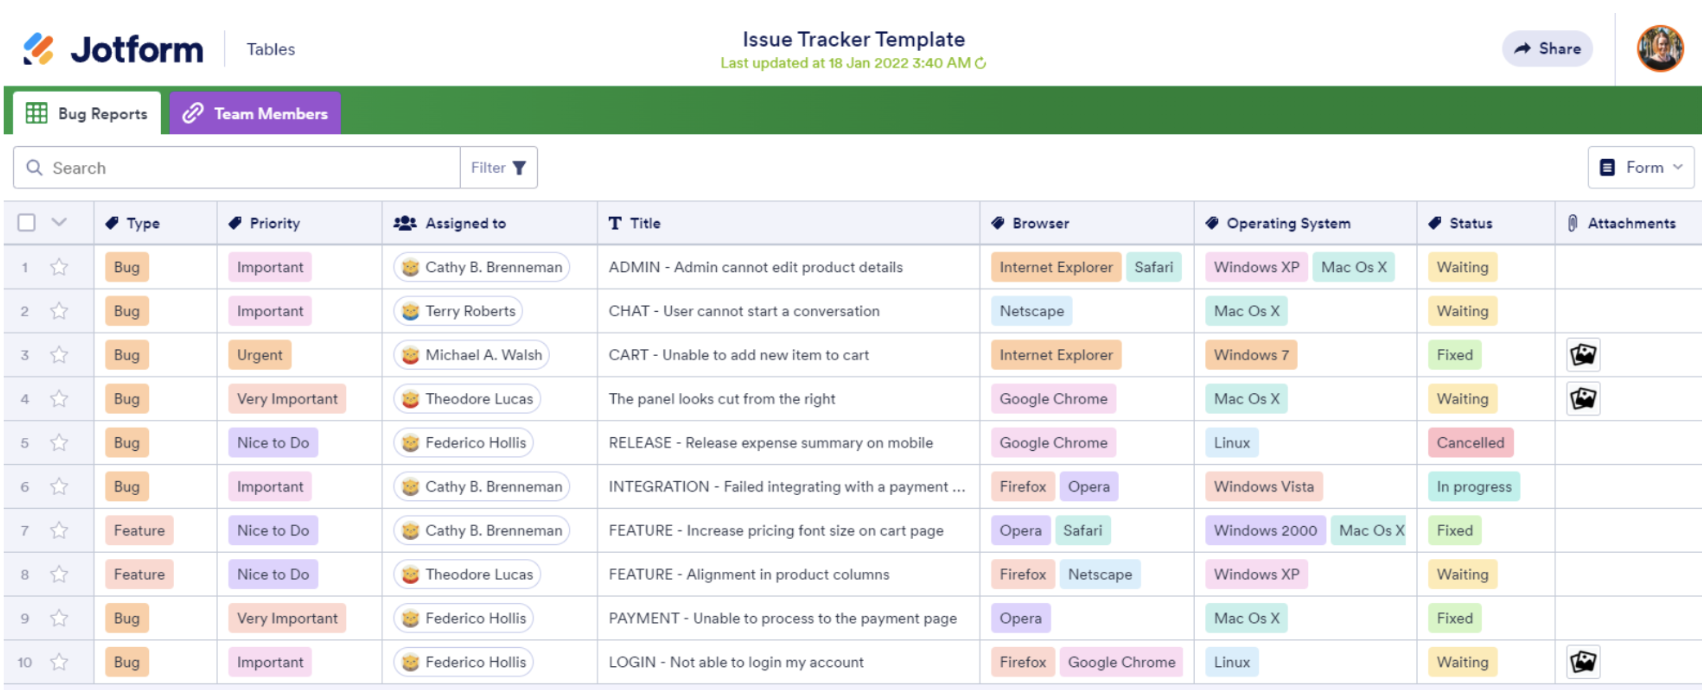 Image of Issue Tracker Template